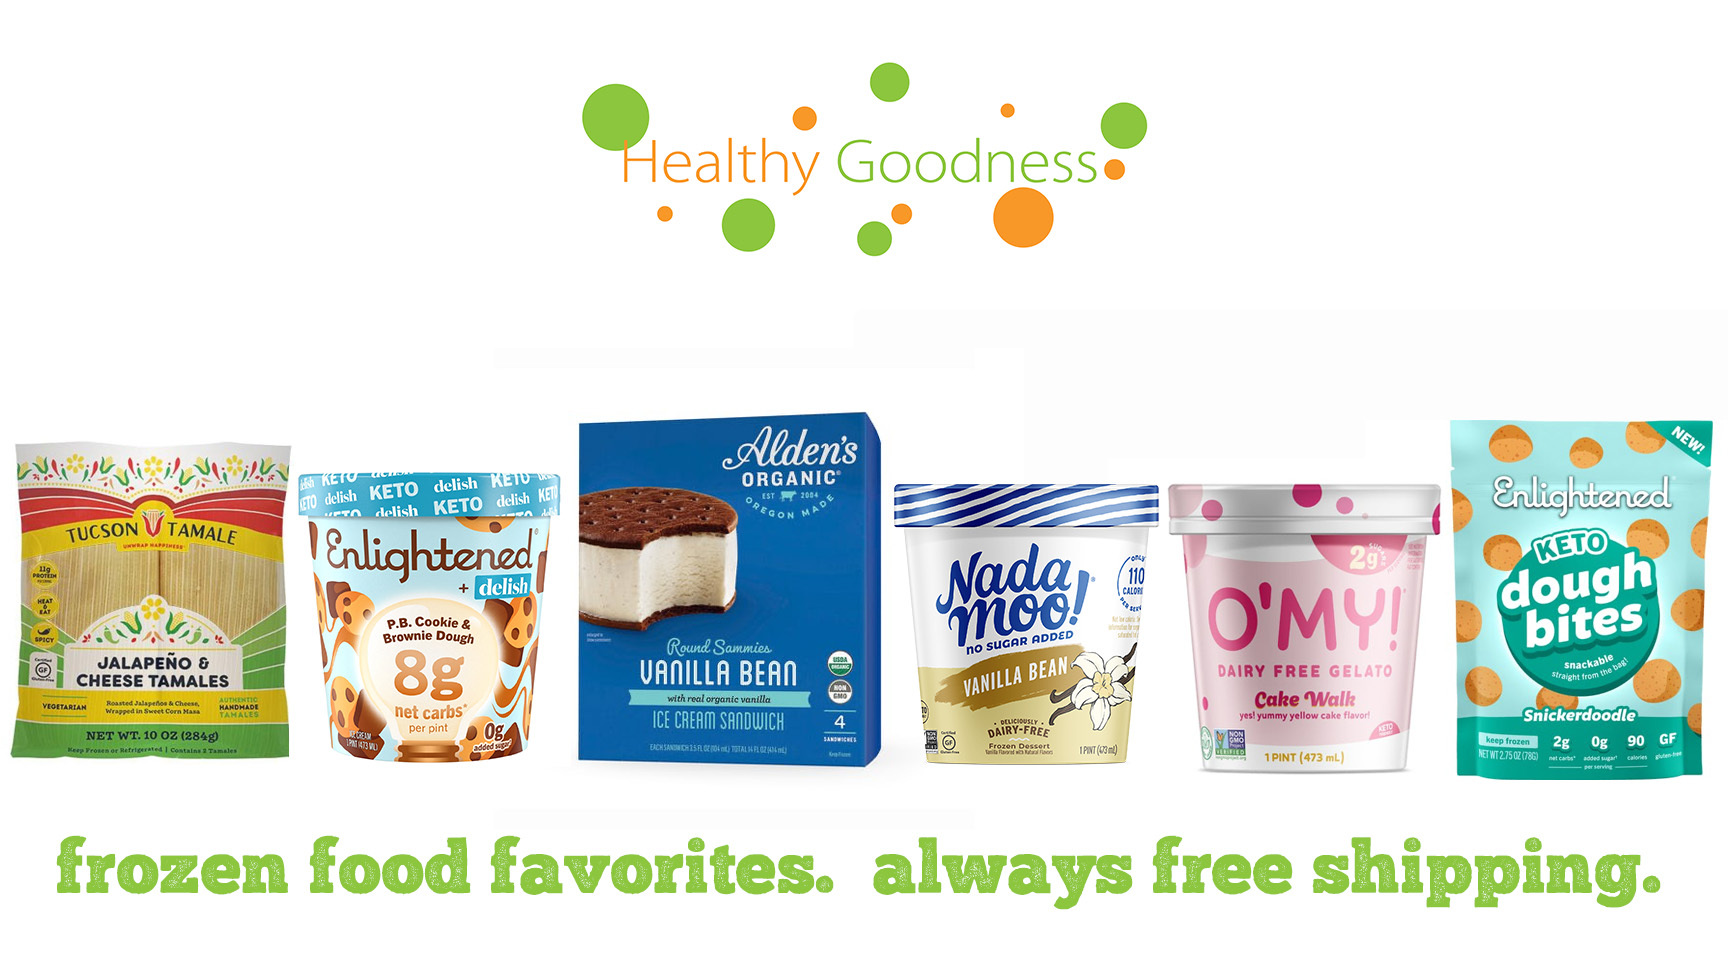 Healthy Goodness has your frozen food favorites, which always ship for free.